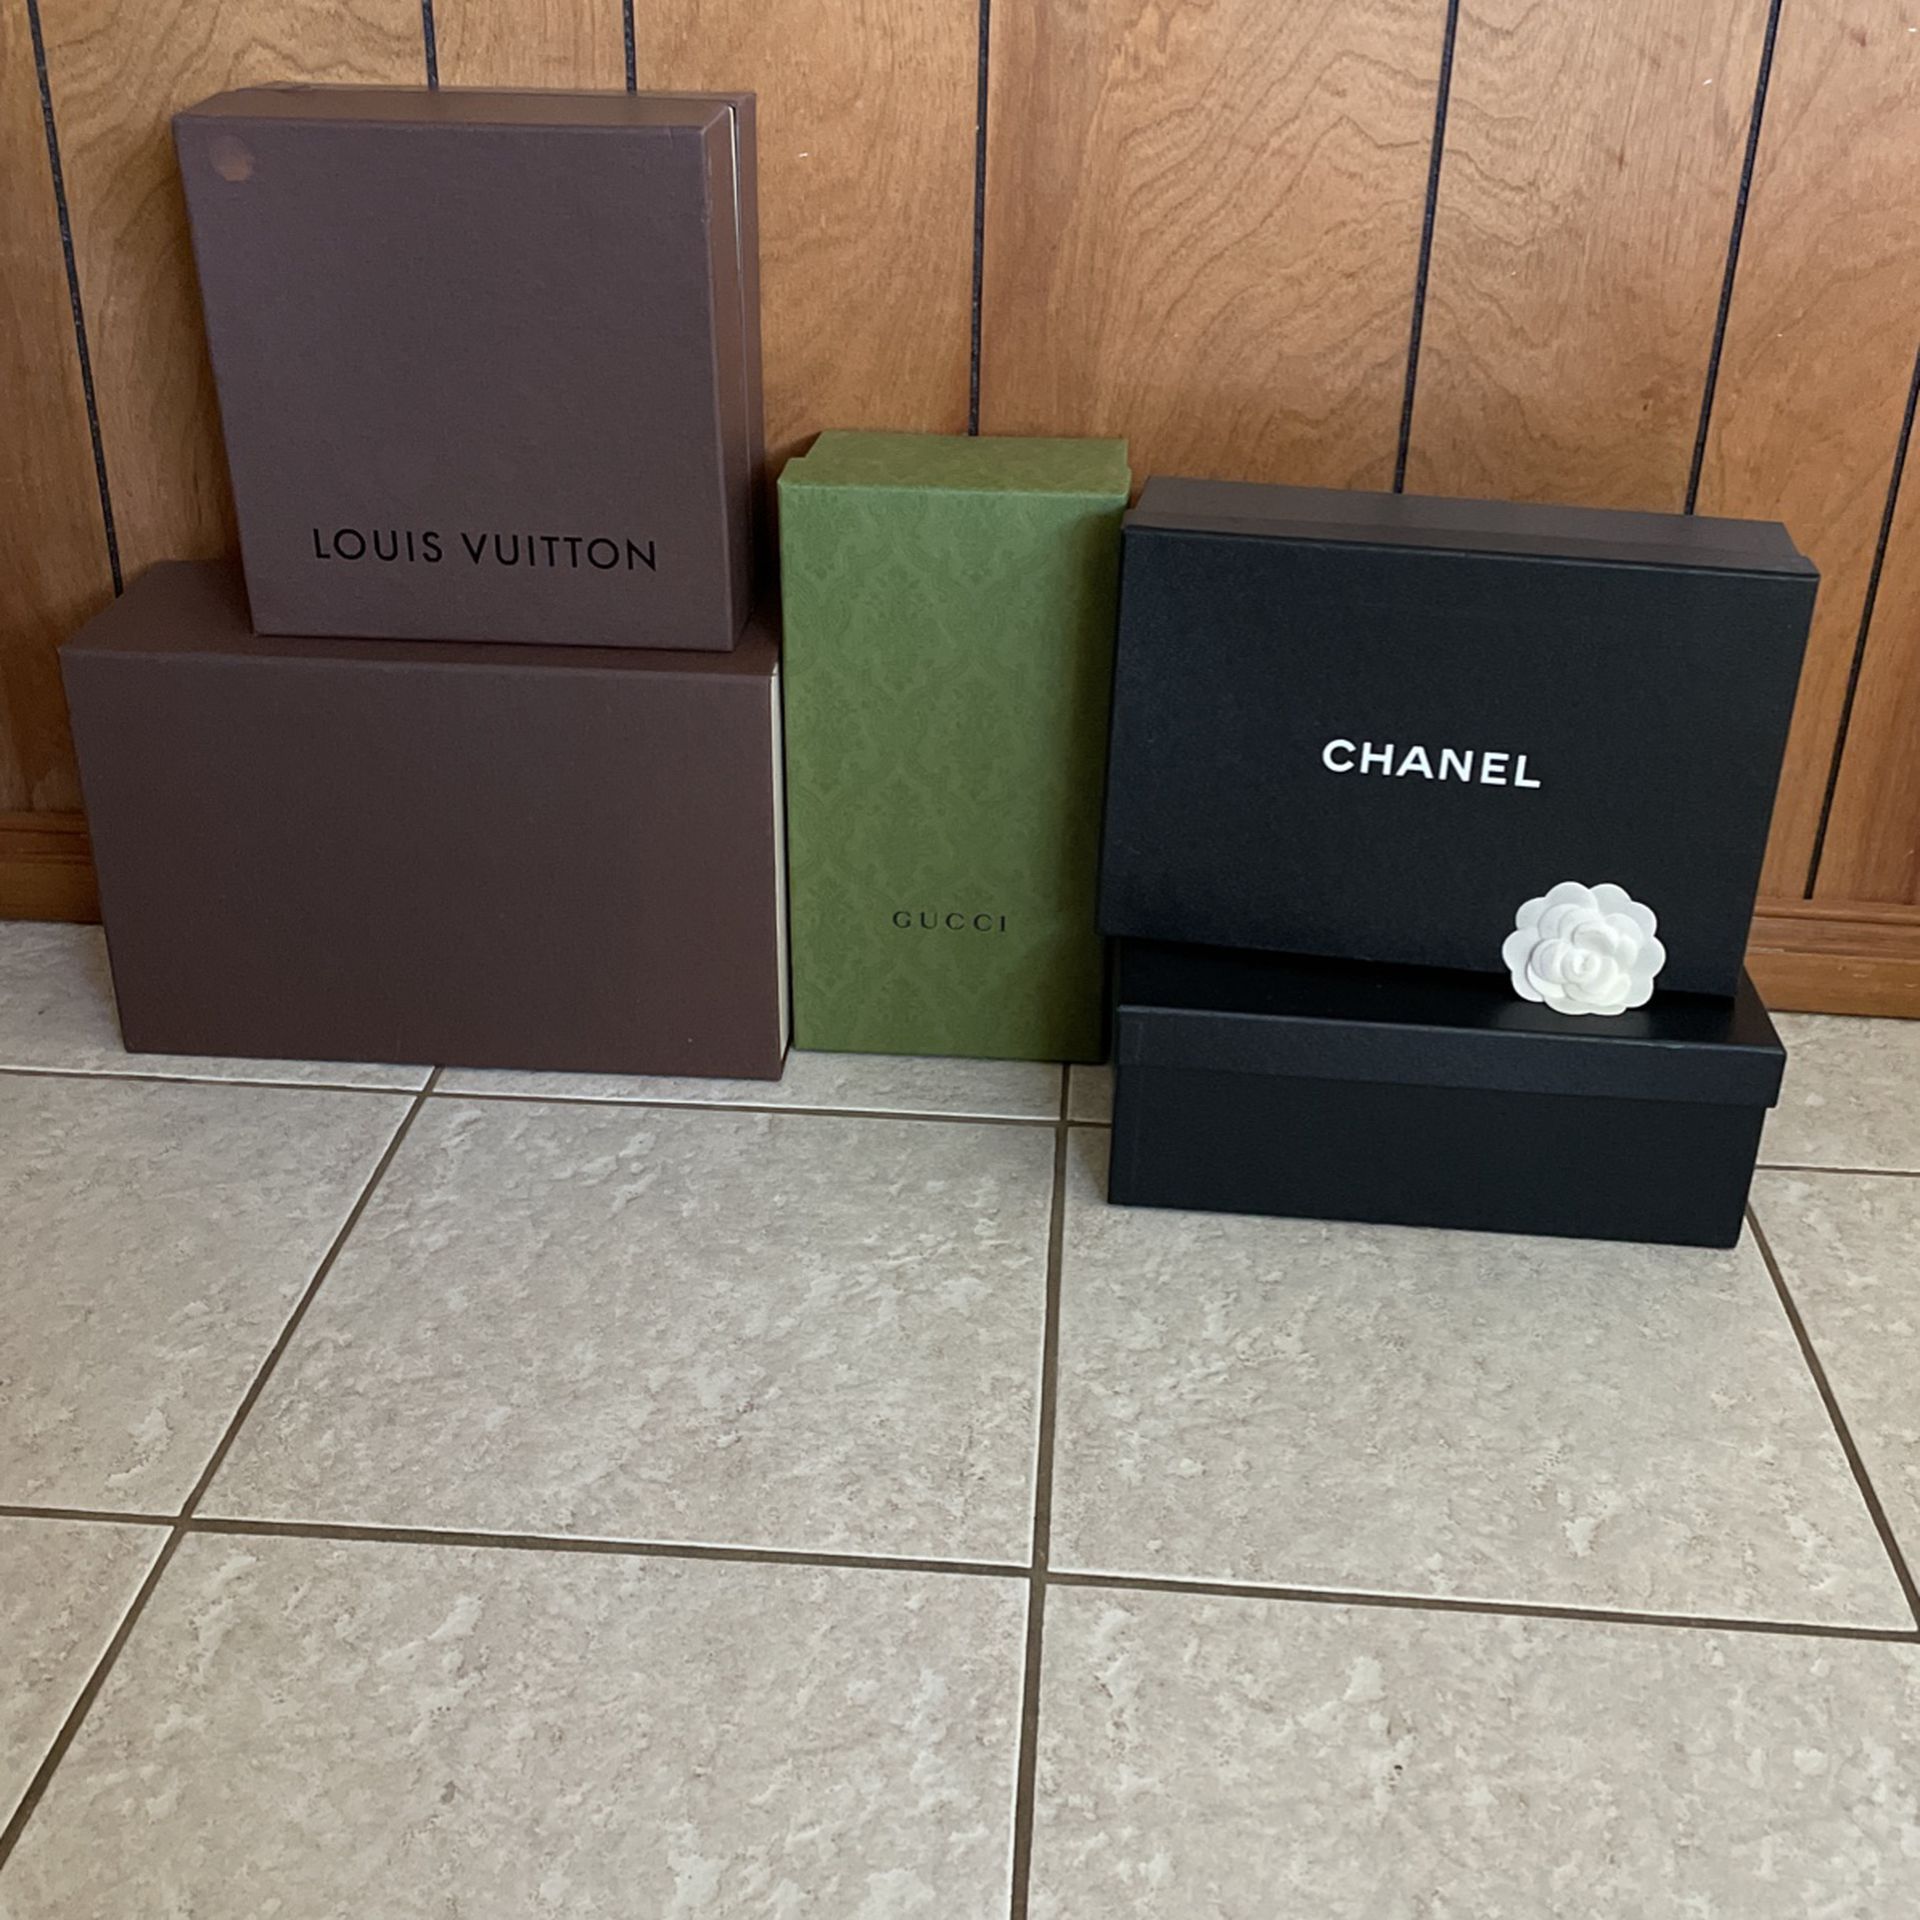 Chanel And Louis Vuitton Shoe And Hand Bah Box